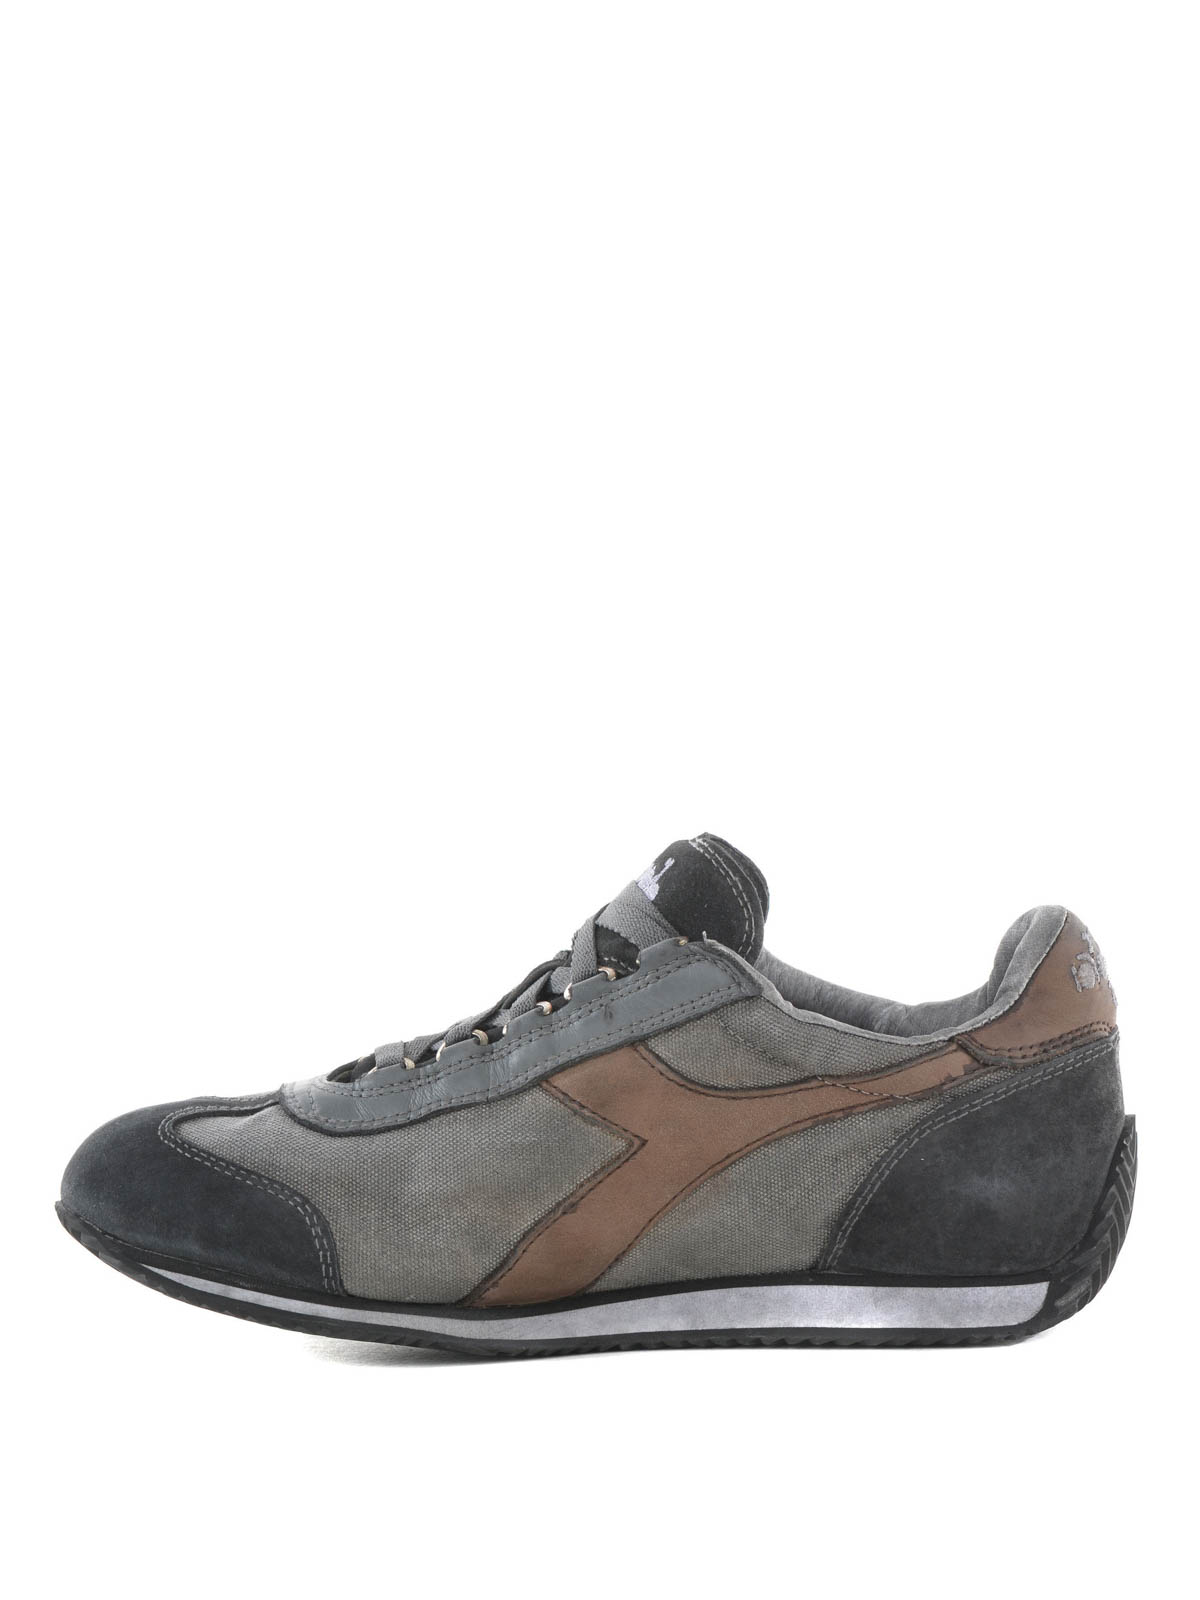 Diadora Heritage - Equipe SW Dirty 11 sneakers - trainers - 15654875019